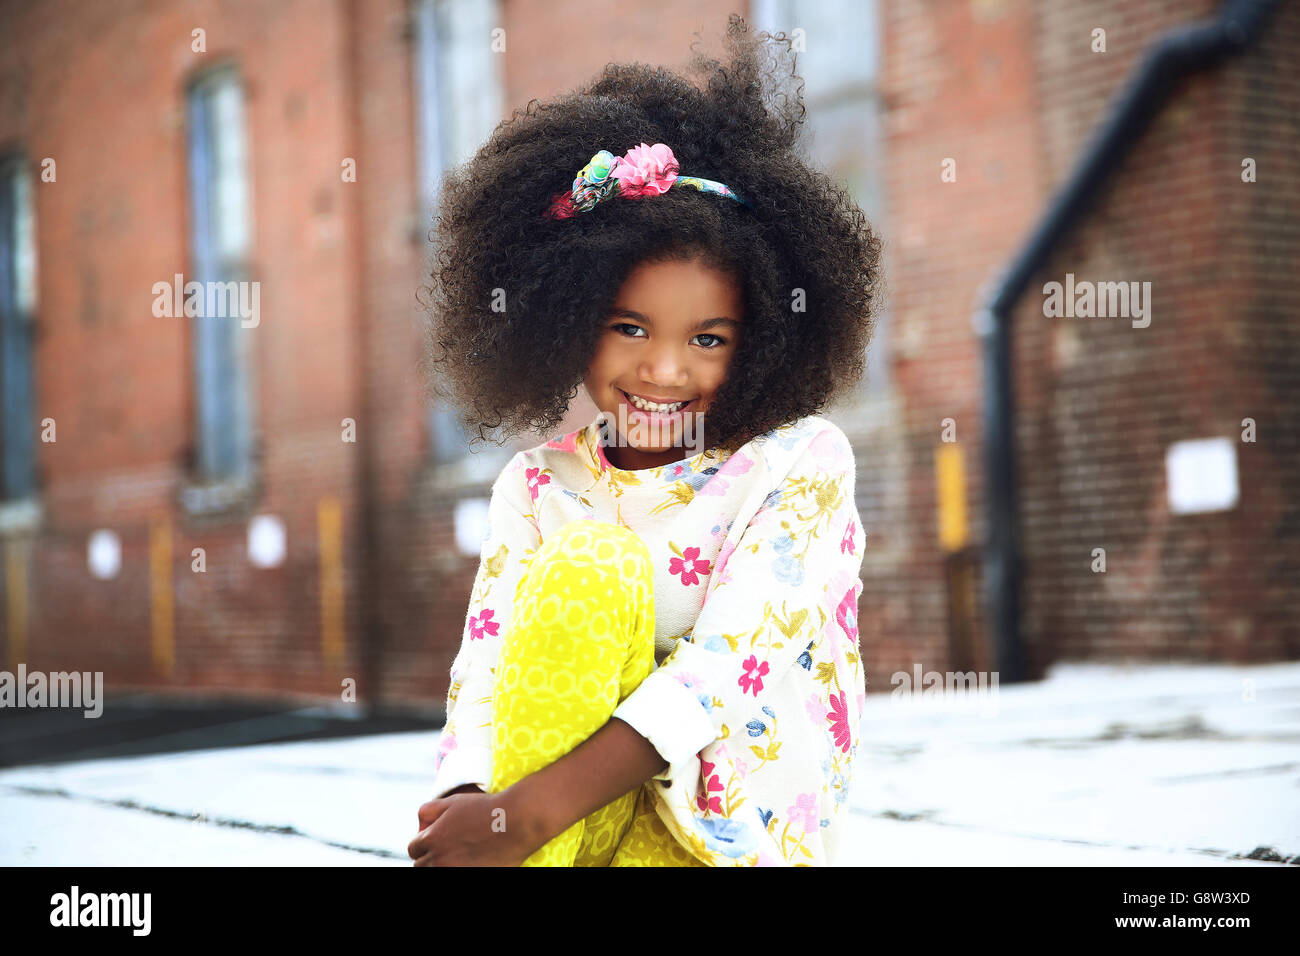 little girl poses for camera with an urban background Stock Photo